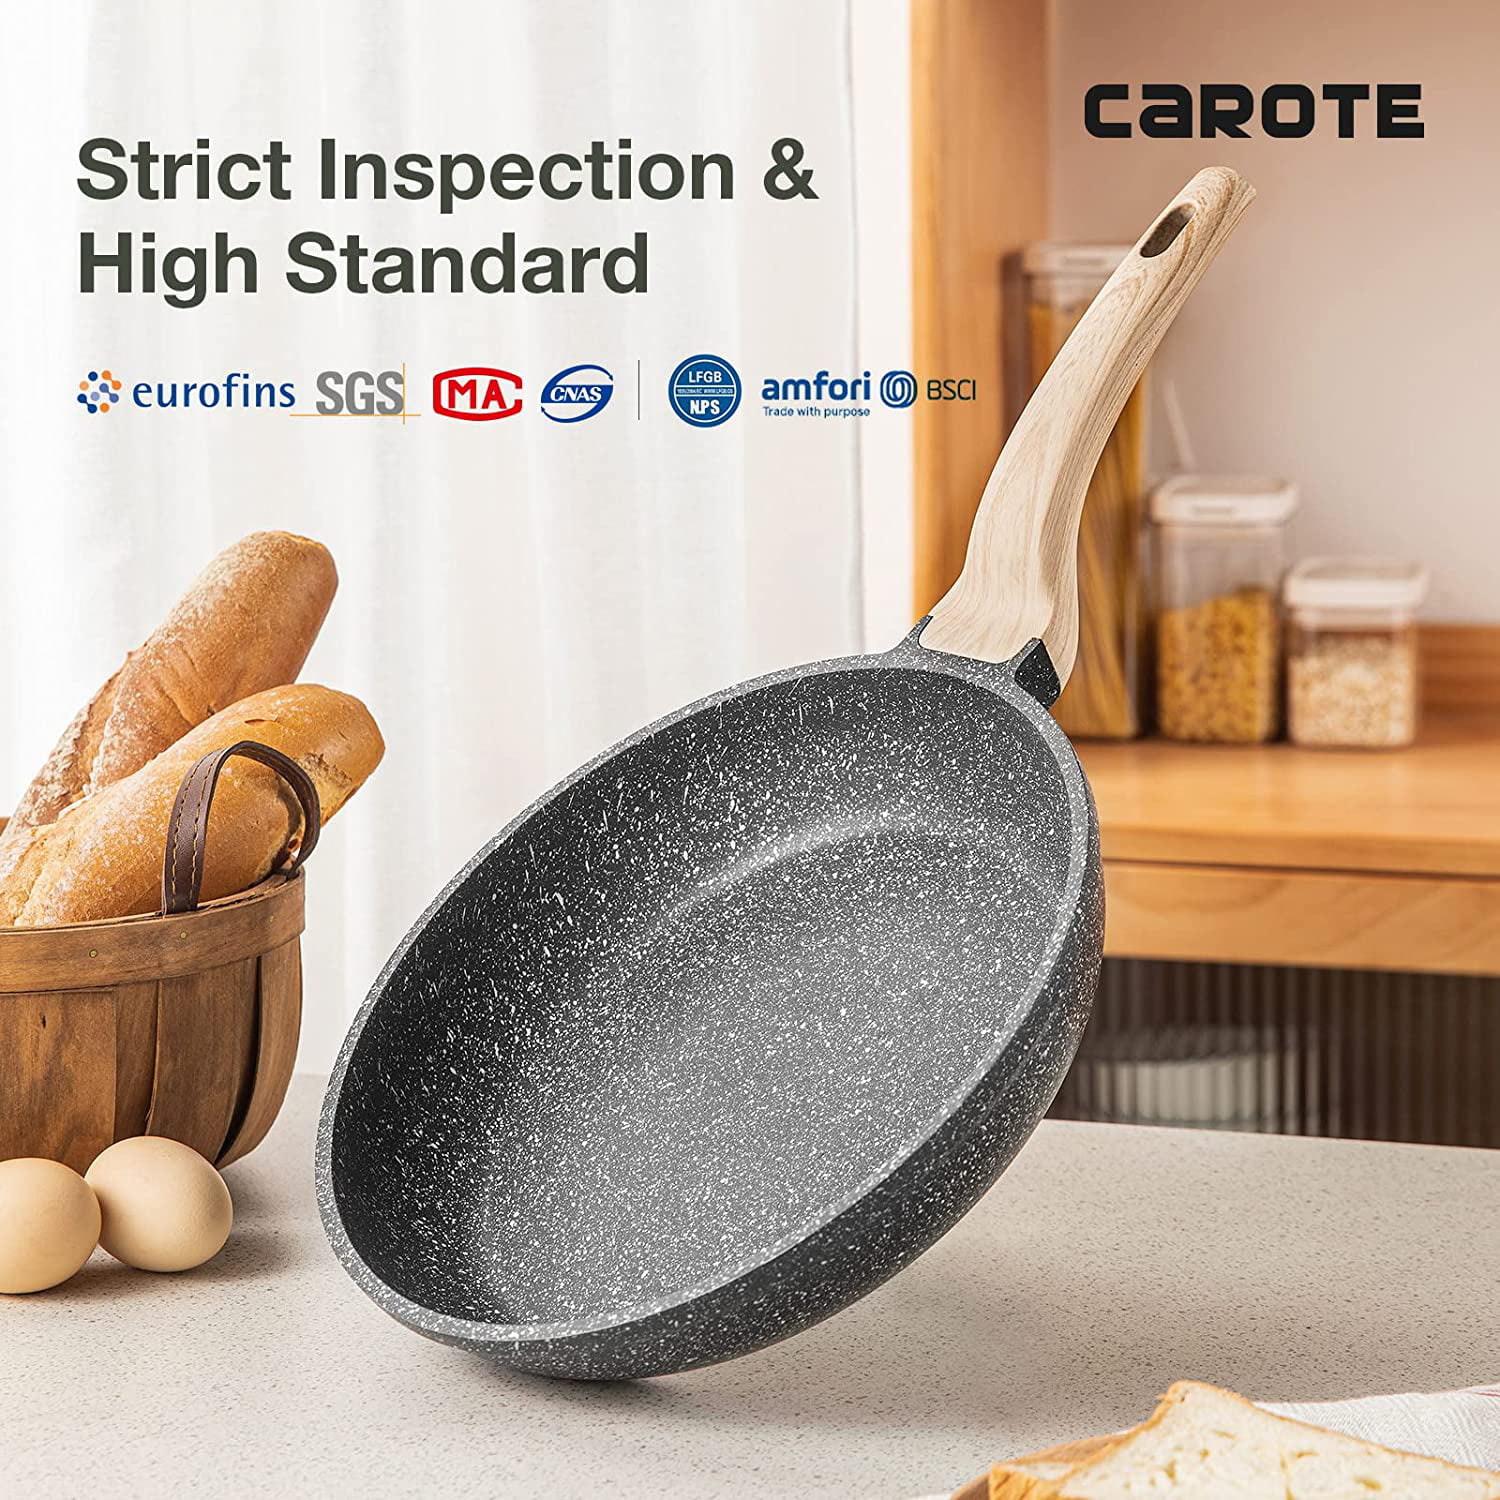 Carote 11 Inch Non-stick Frying Pan Skillet,Stone Cookware Granite Coating from 